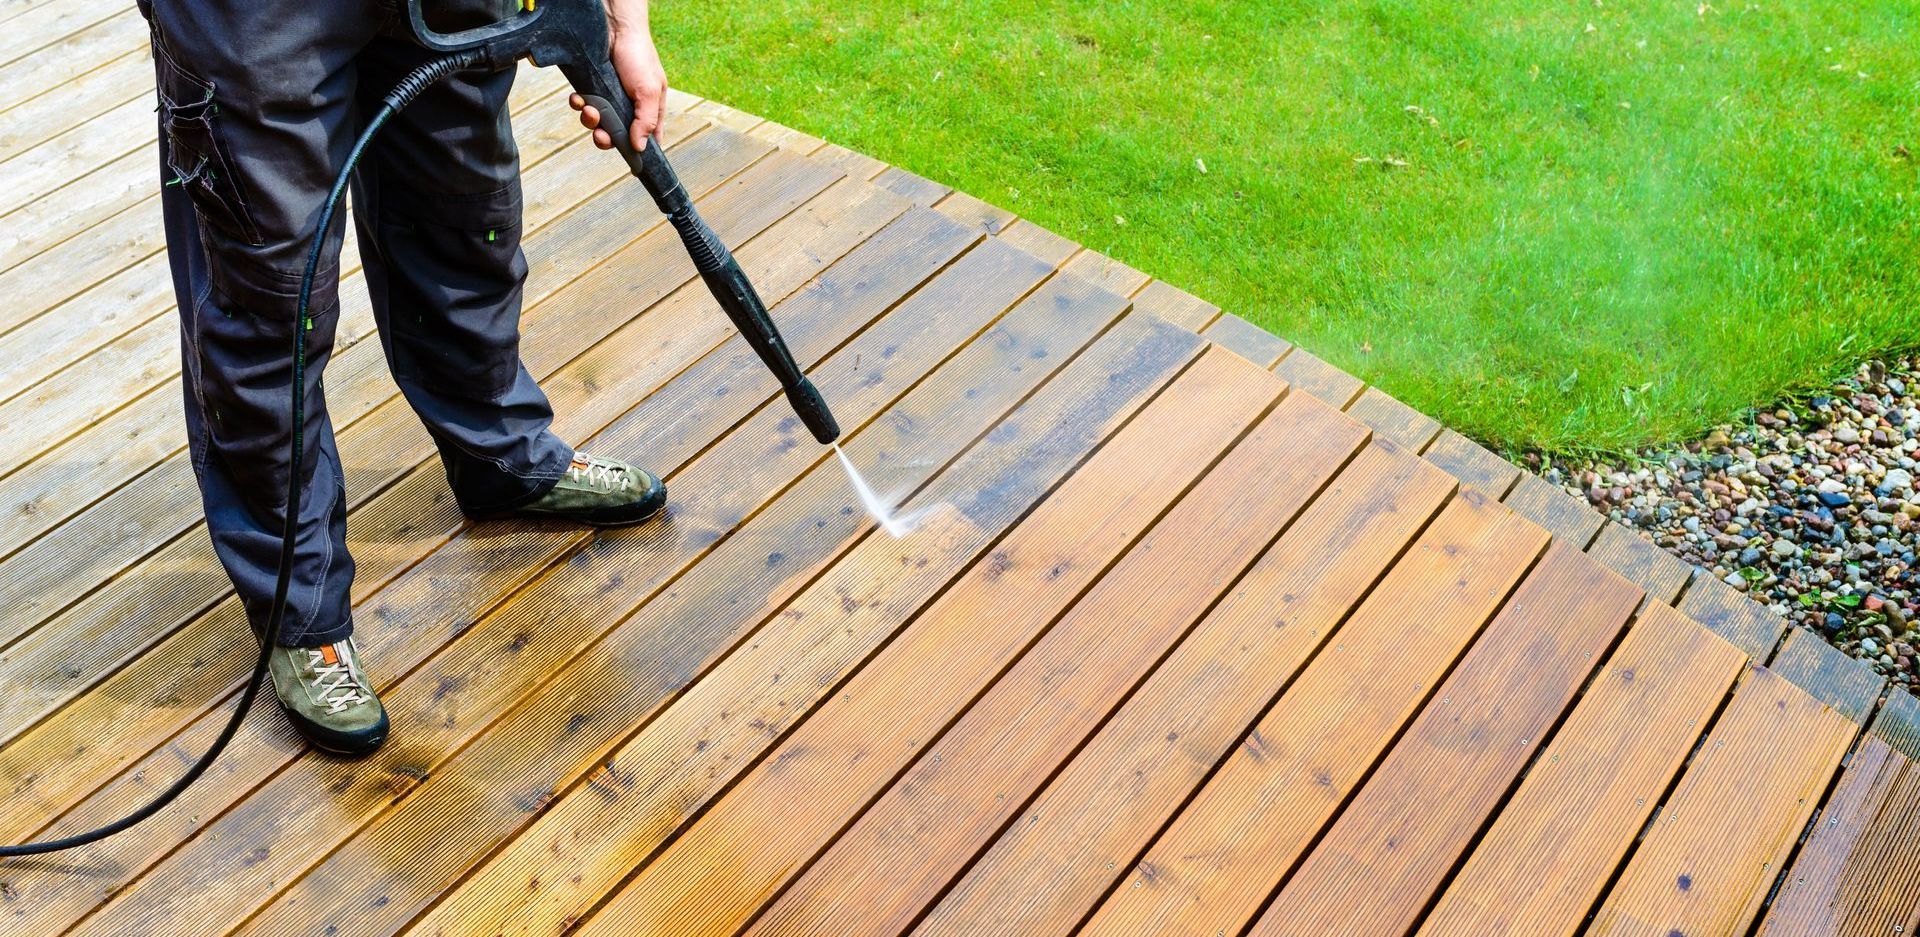 Best Residential Power Washing Company- Power Washer- Arbutus, MD